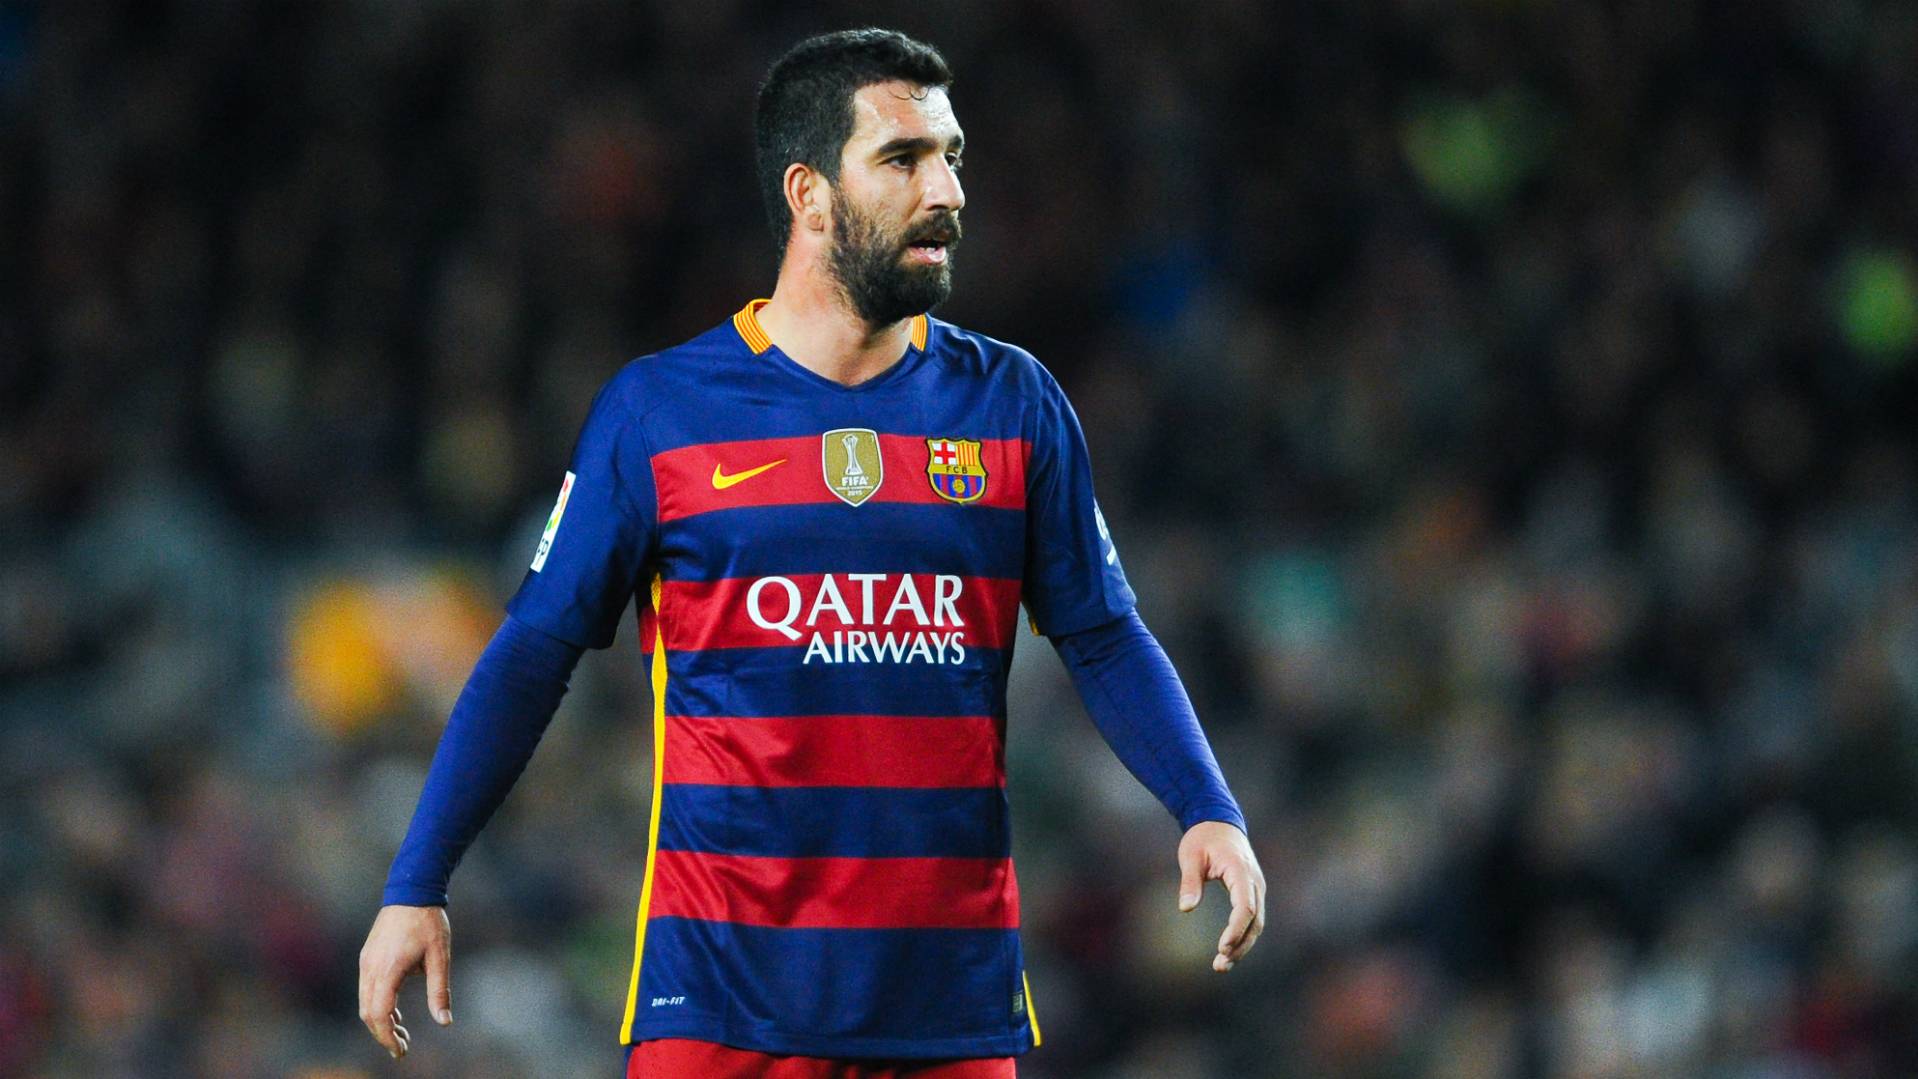 Burn Turan wants to heave the Champions League